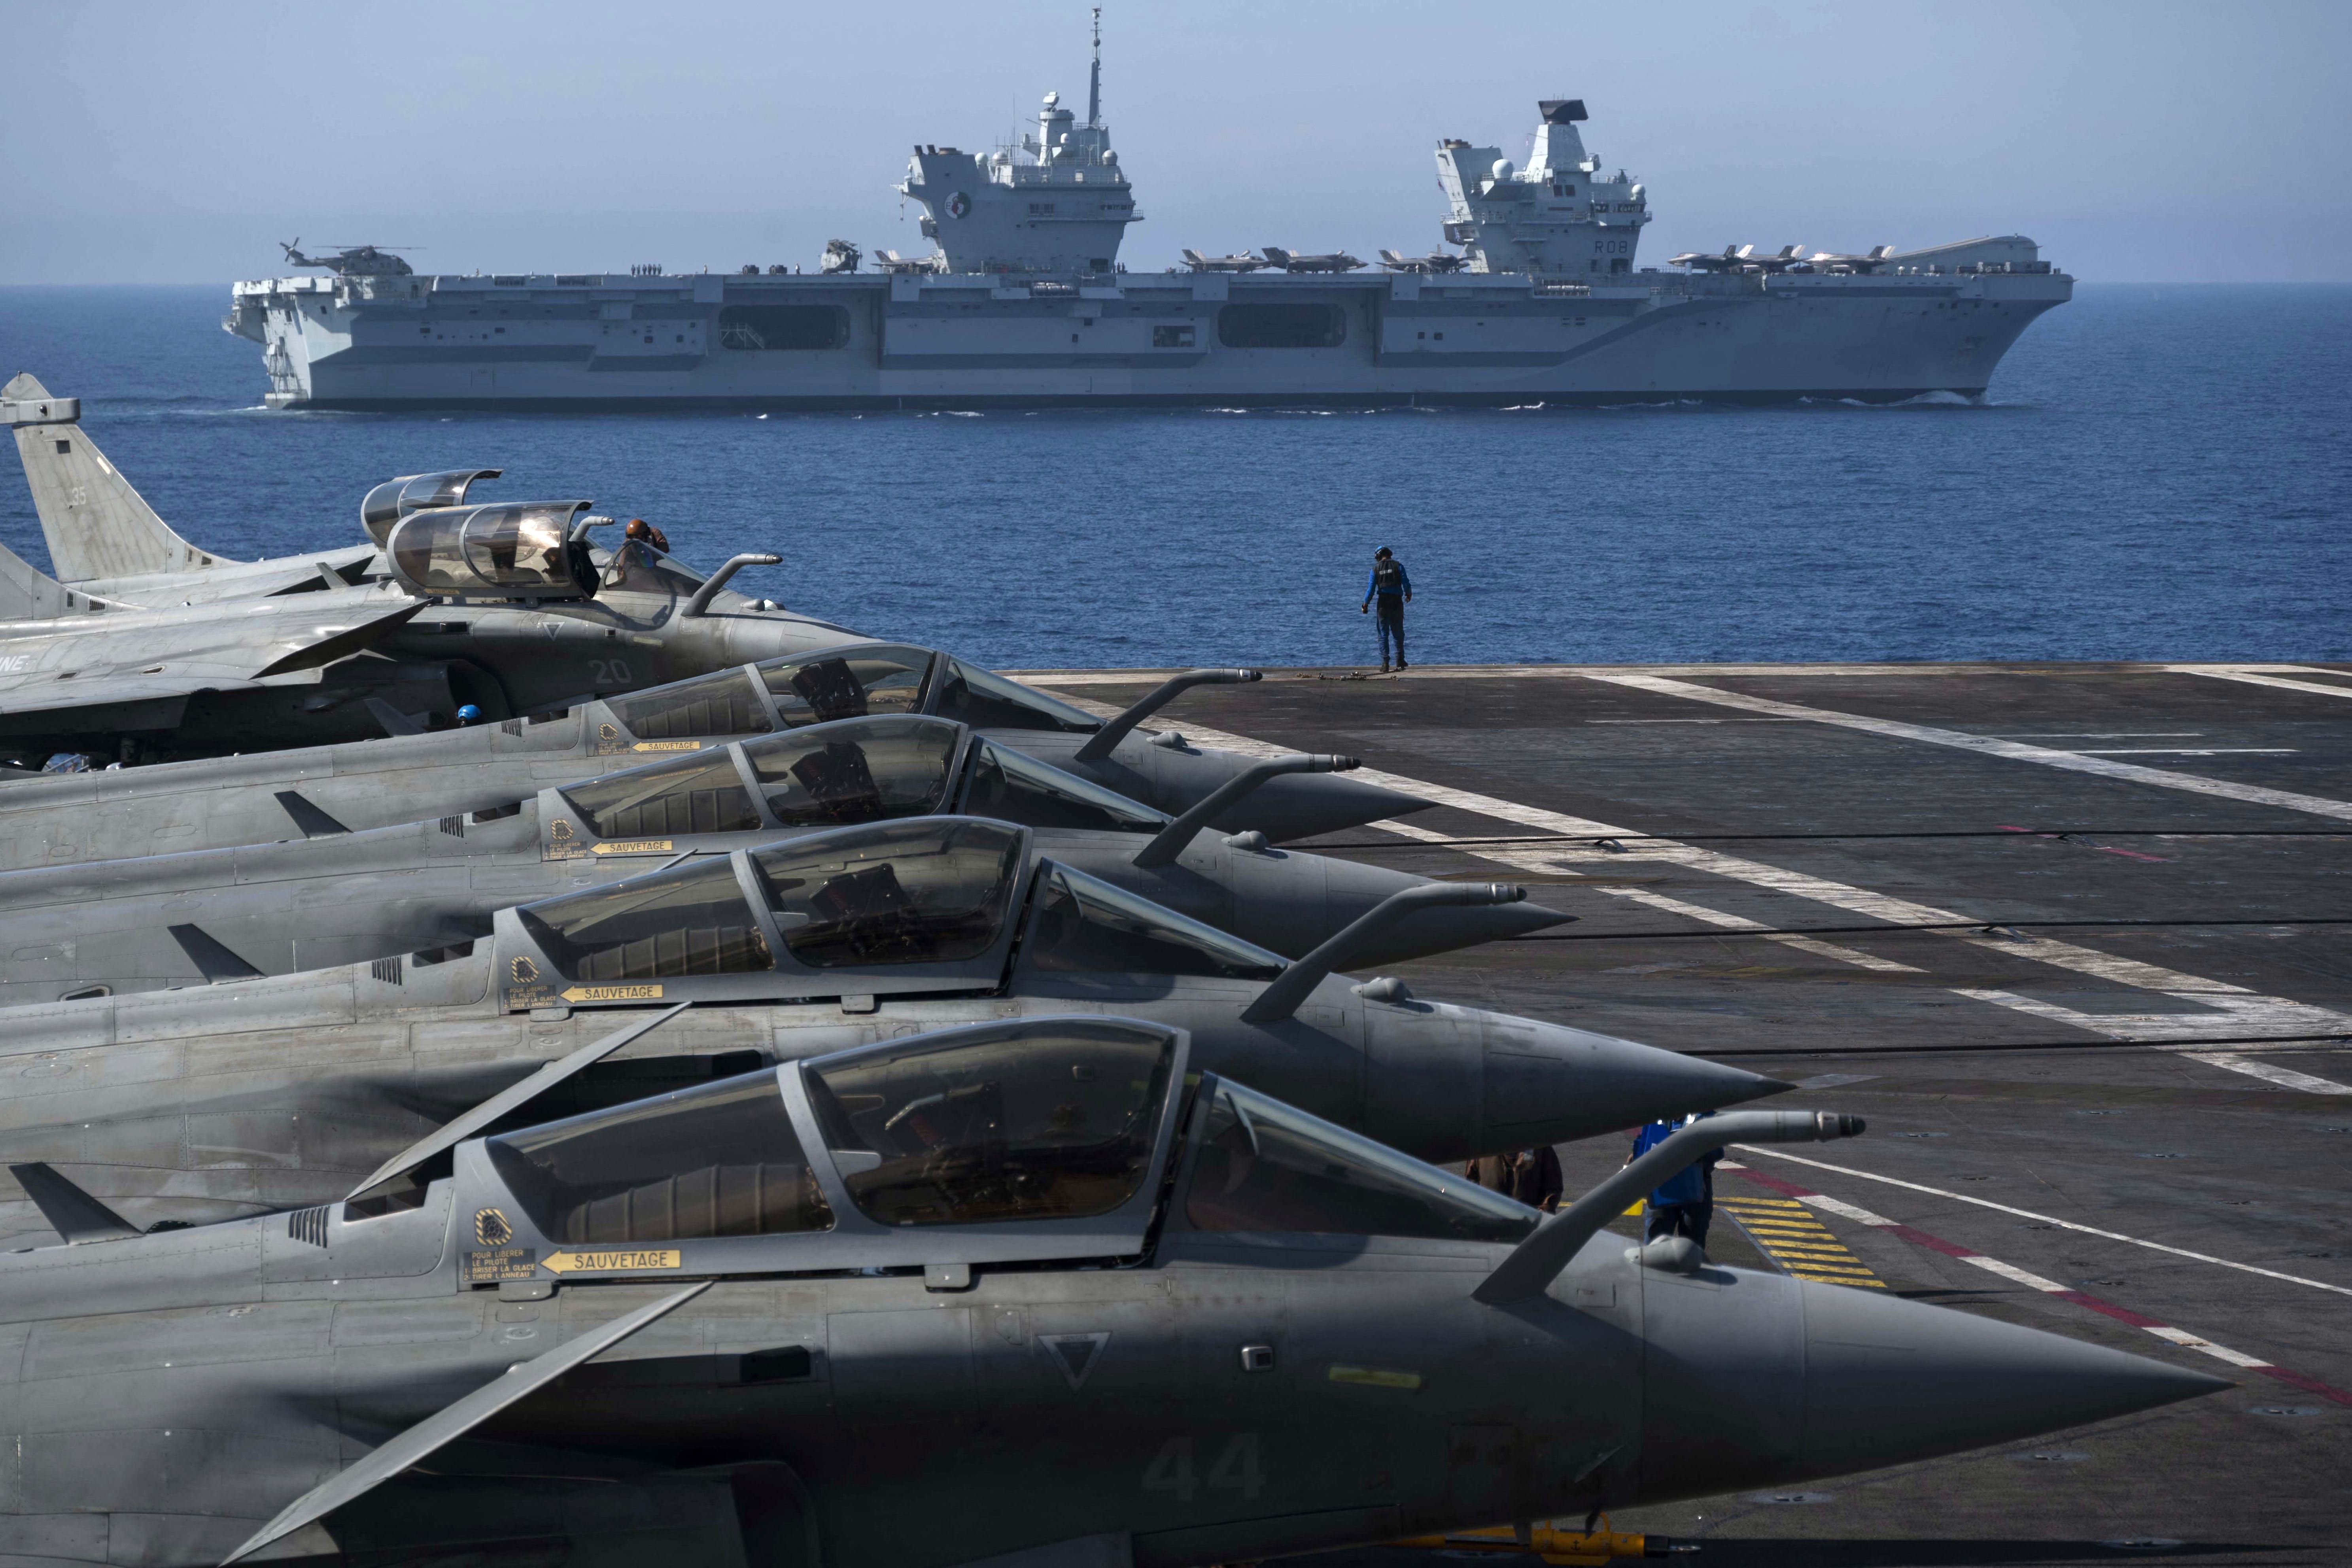 File: The French aircraft carrier Charles de Gaulle is seen with the UK Royal Navy's aircraft carrier HMS Queen Elizabeth in the background, during the exercise ‘Gallic strike’ off the coast of Toulon on 3 June 2021